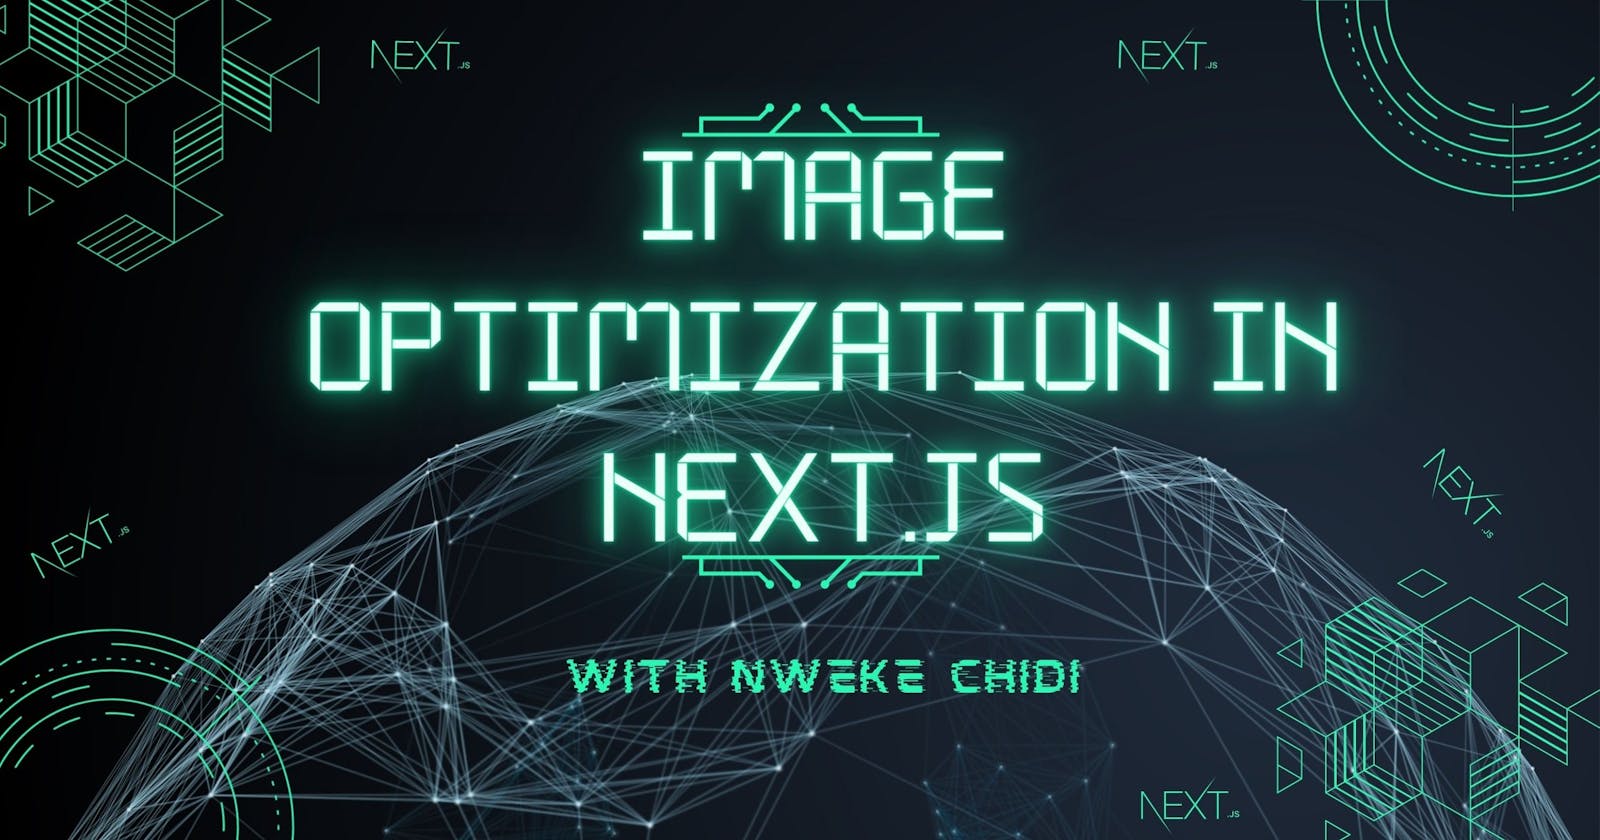 Image Optimization in Next.js: Why It's Good and How to Use It